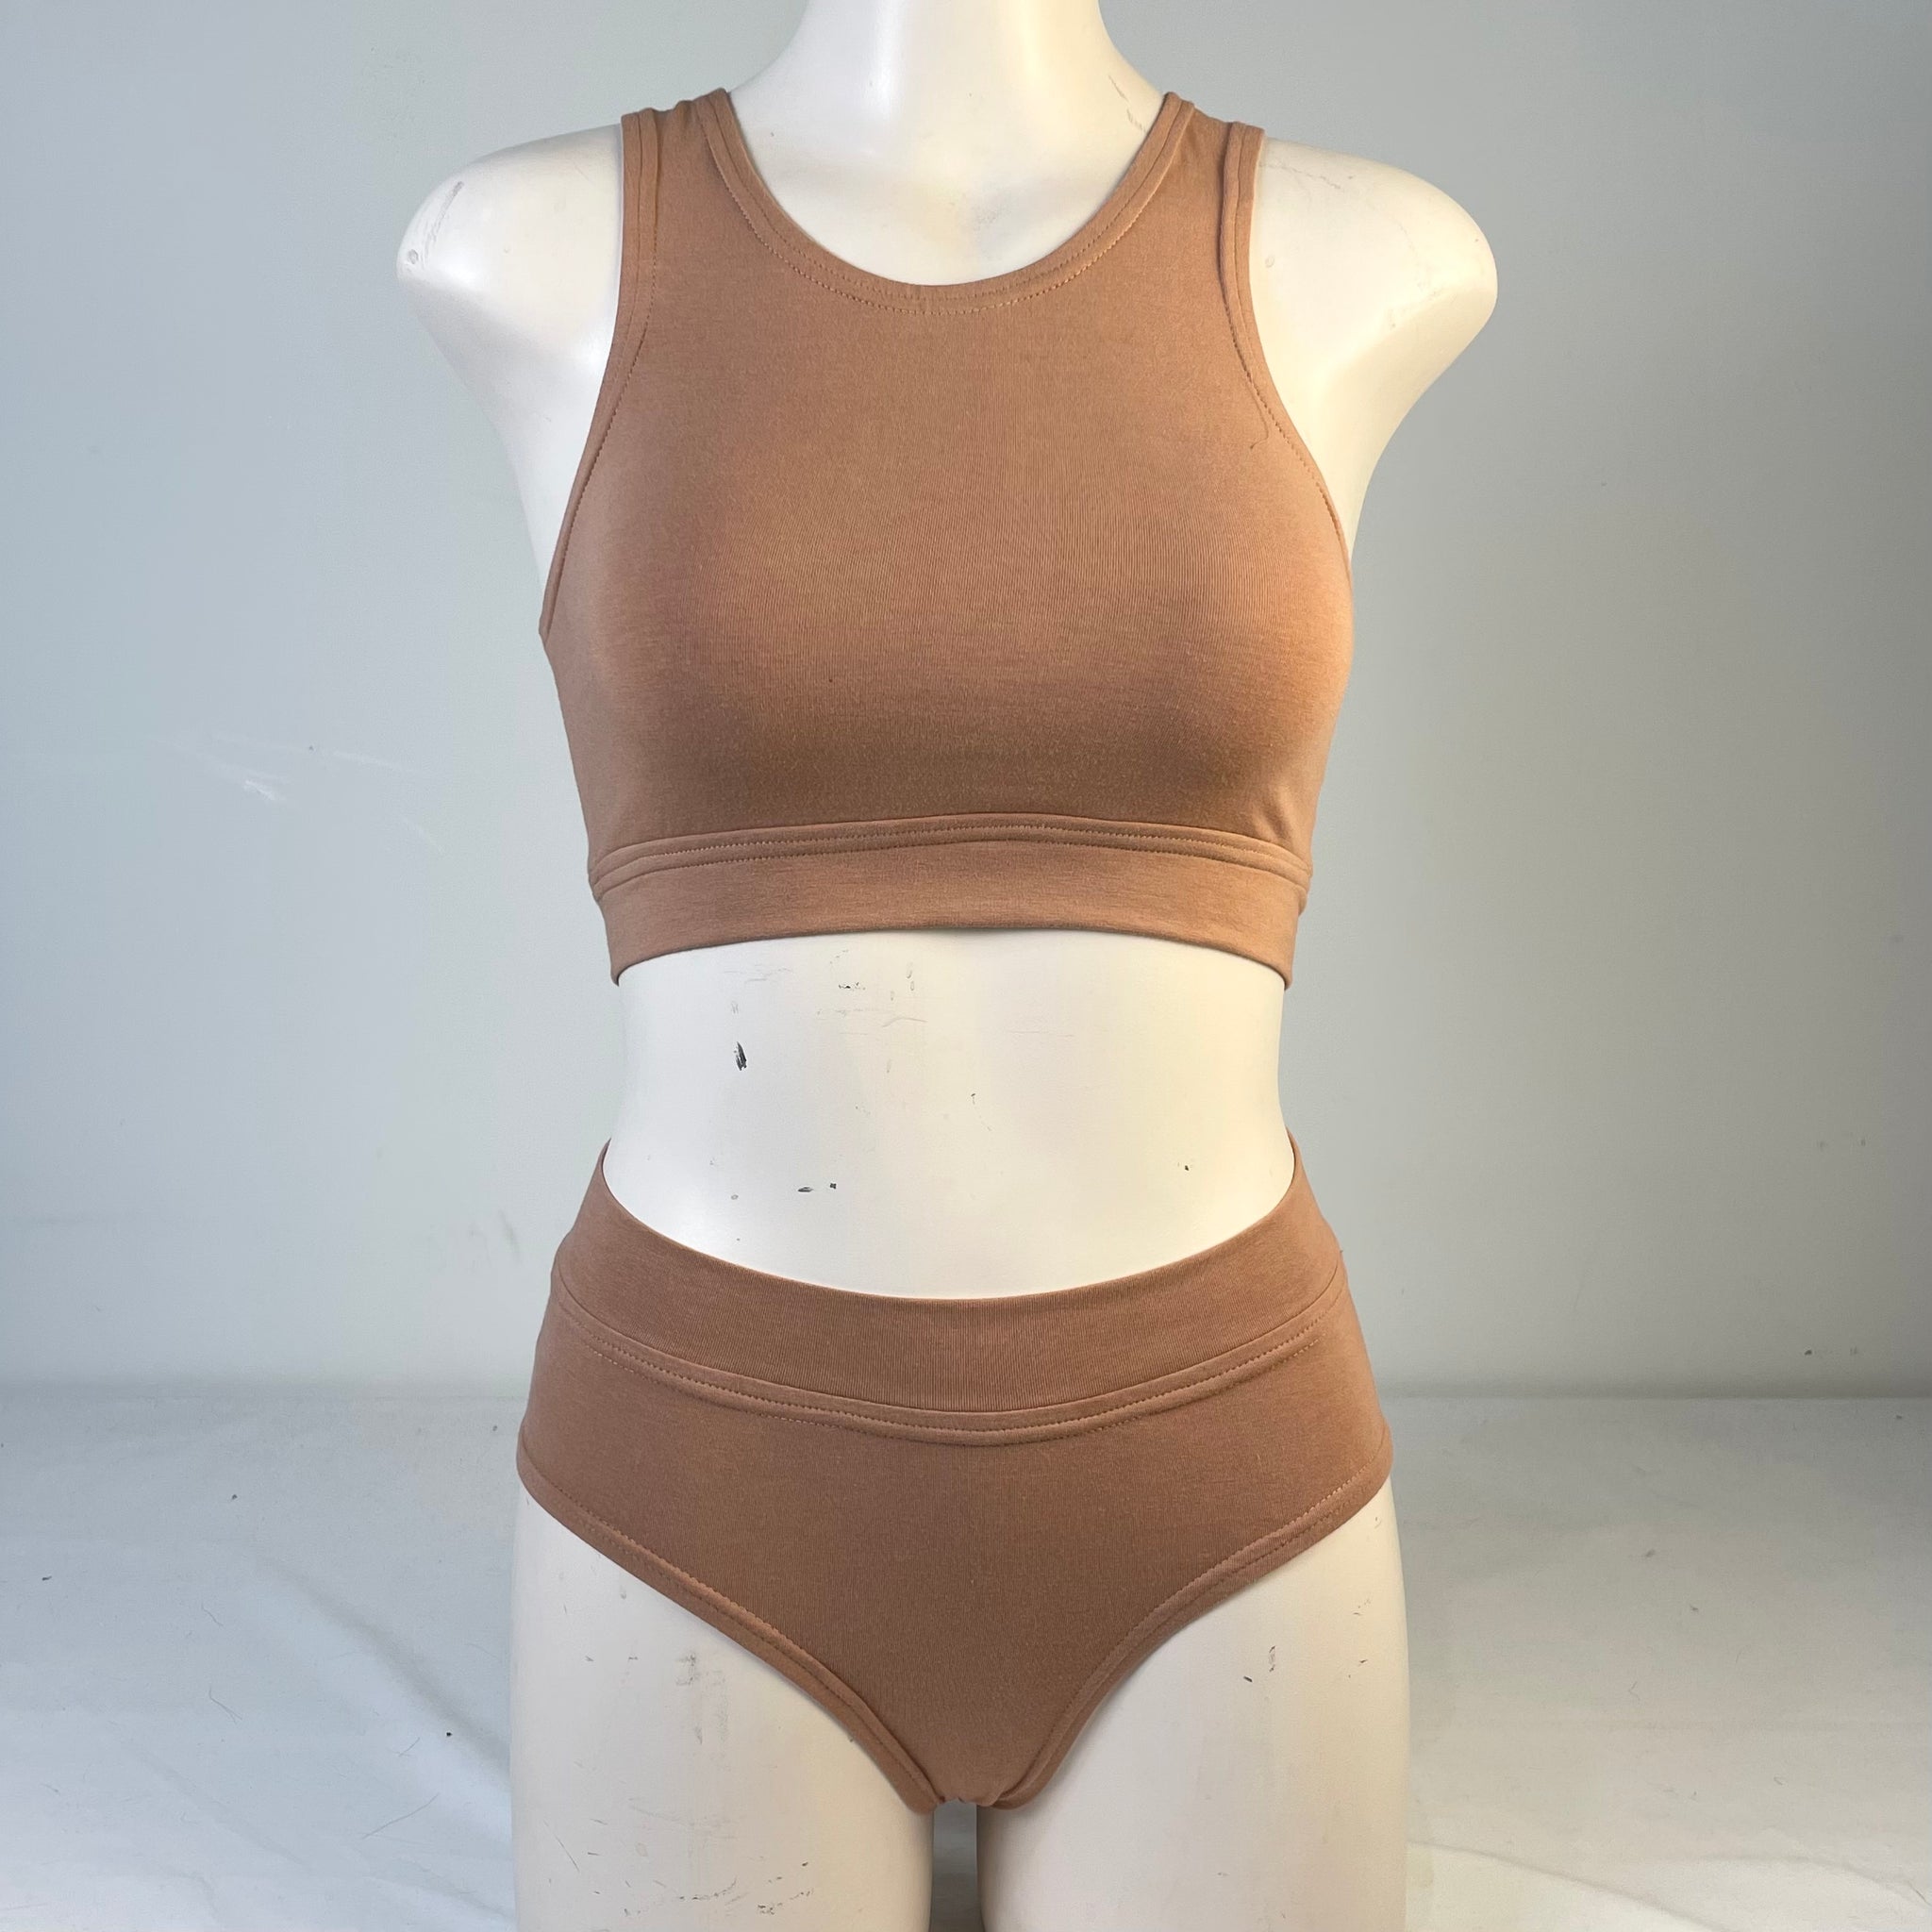 Scoop Neck Bra: Bamboo or Soy & Organic Cotton Jersey Fabric// Wire Free  Bra // Lined Crop Top // Handmade by Yana Dee Ethical Apparel 